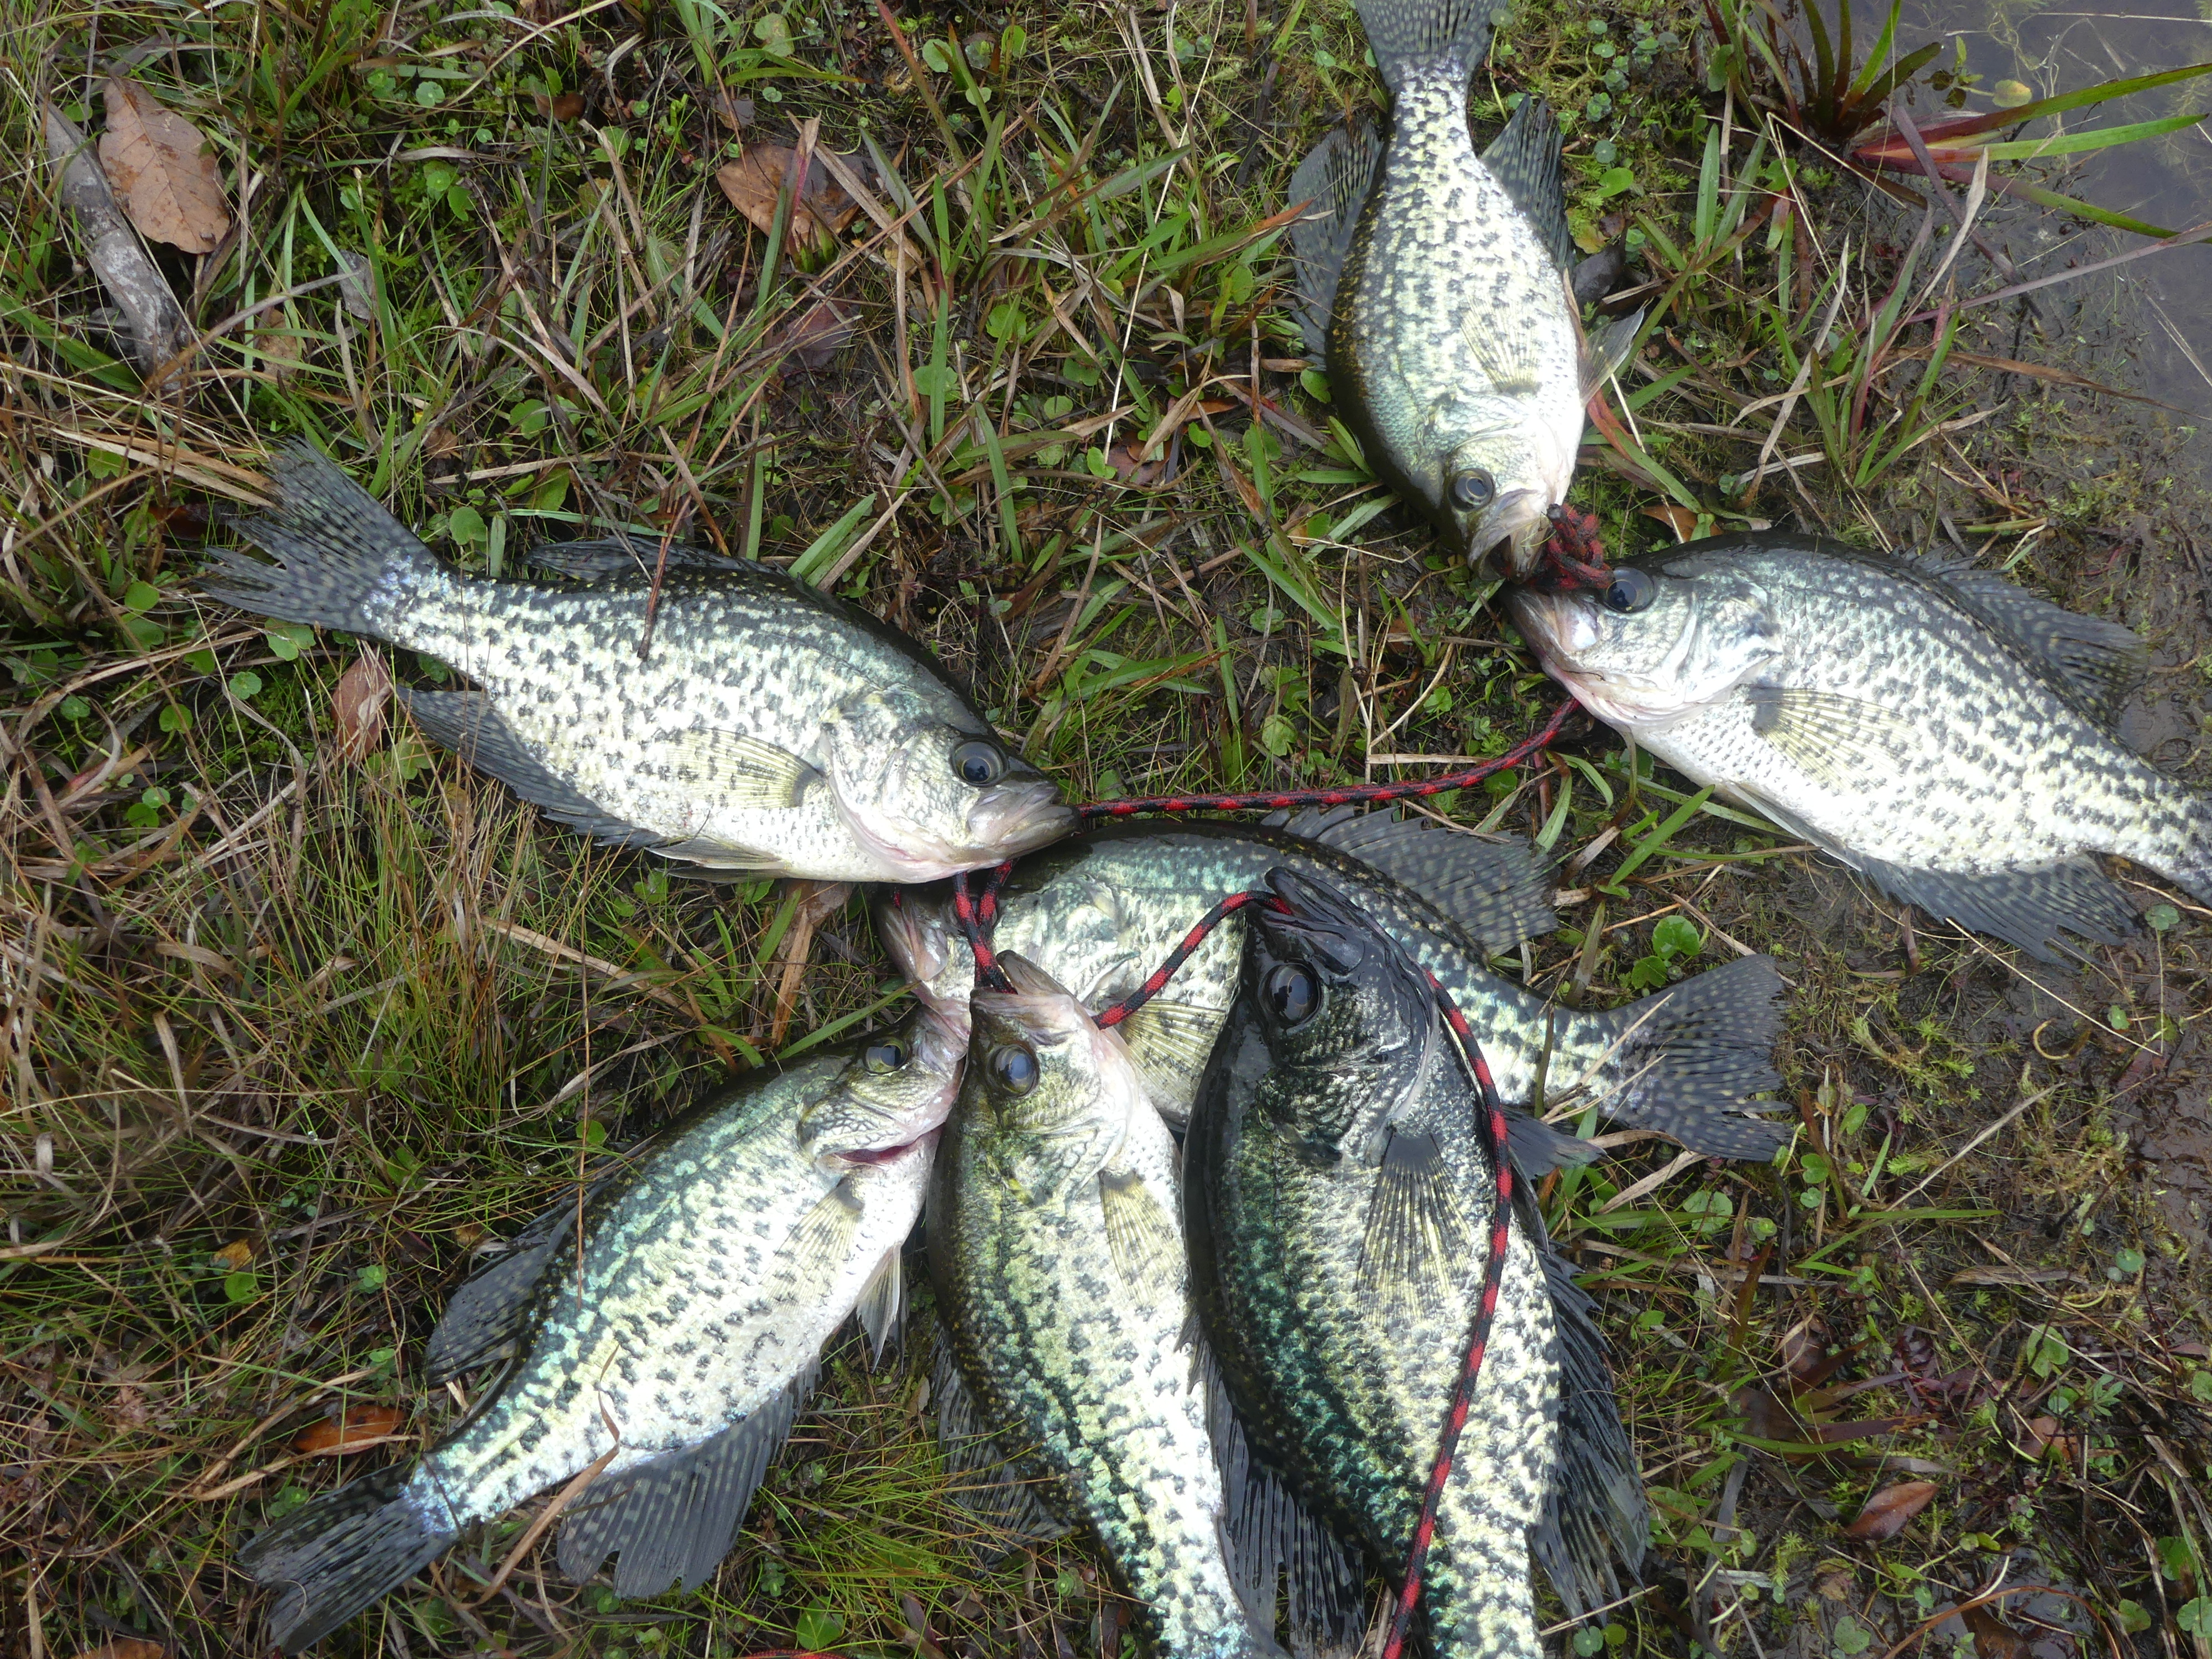 Fly Rod Crappie Fishing- Fun and Effective